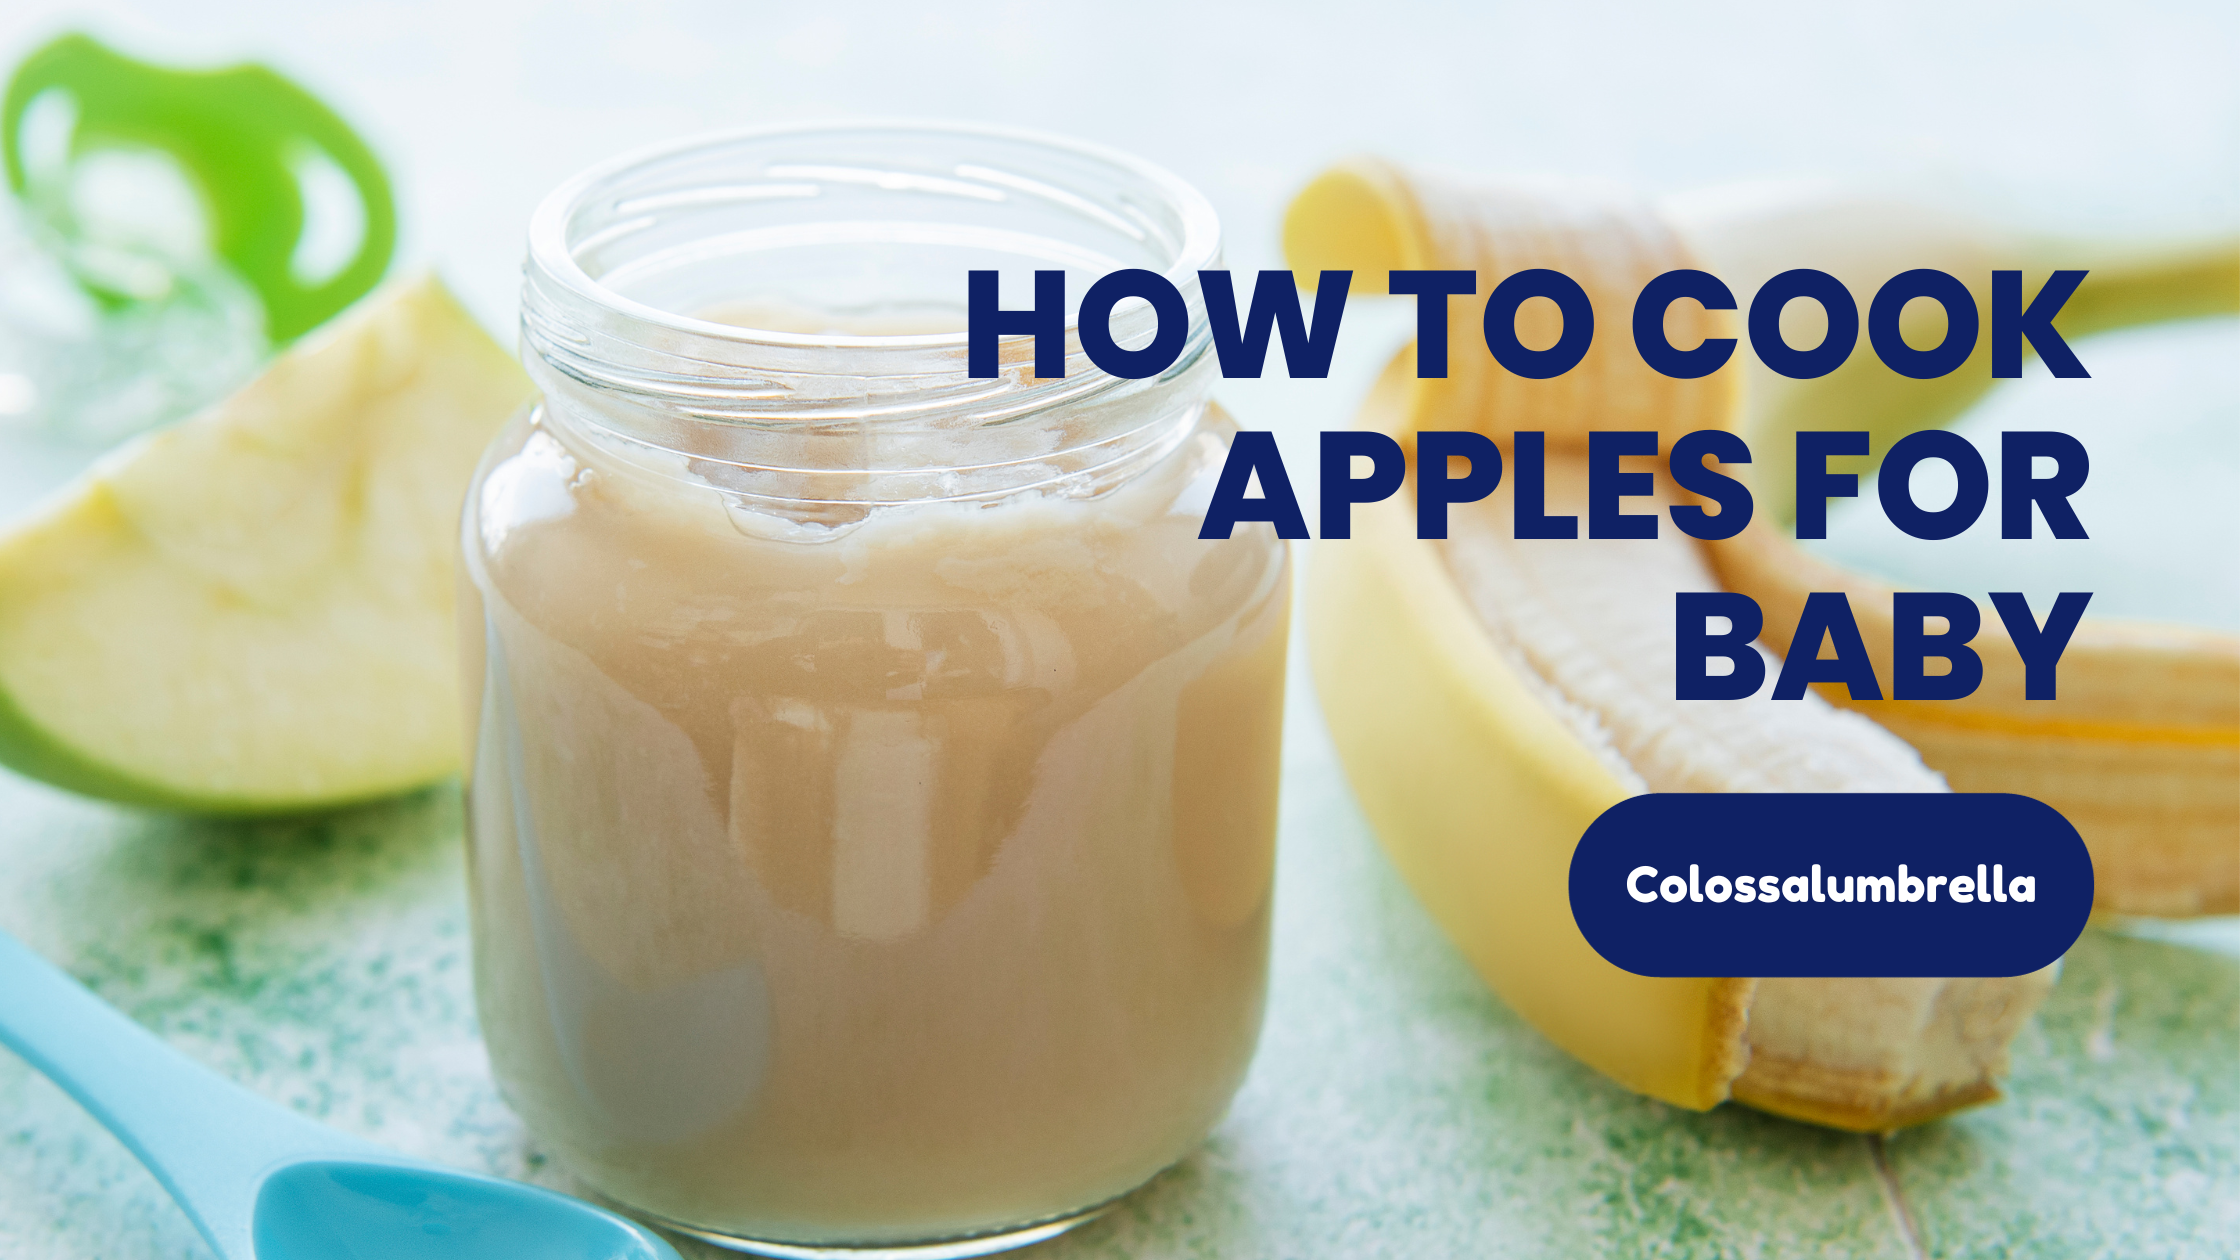 How to Cook Apples for Baby: 3 Simple methods